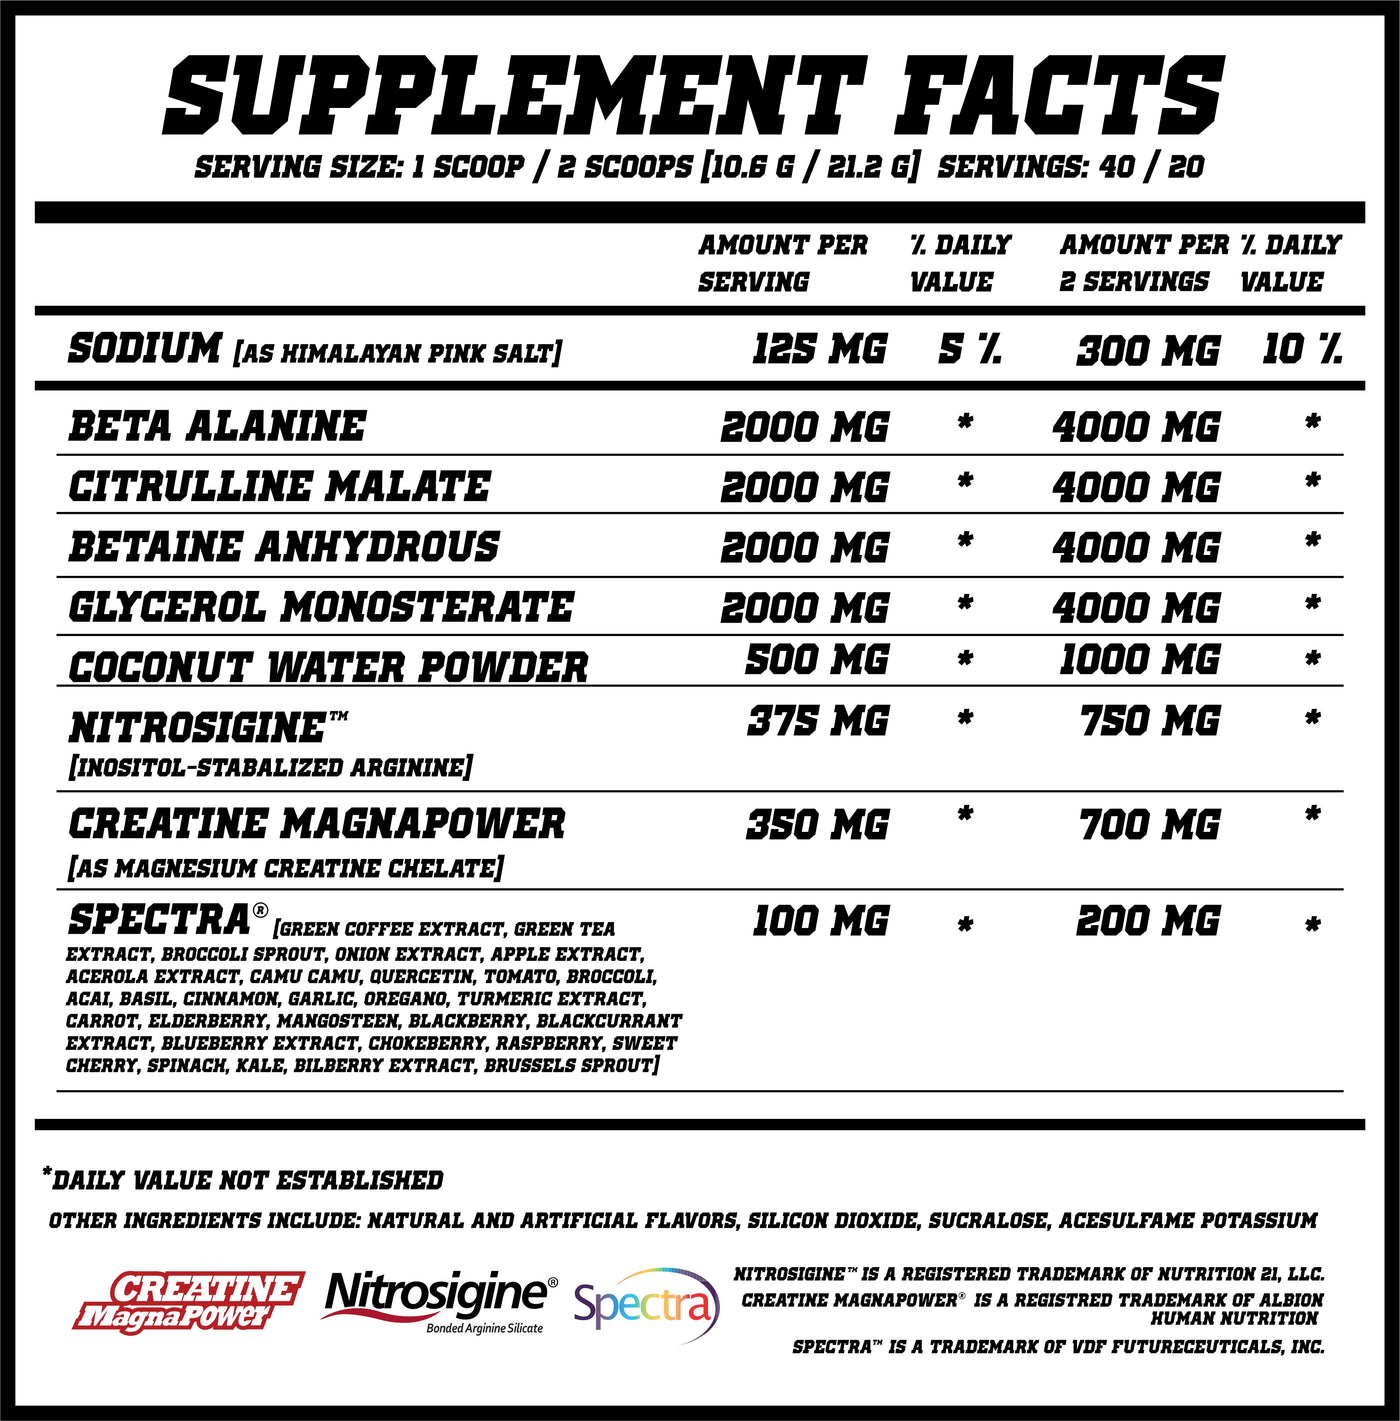 HYPD Supps | PUMP (Pure Muscle Volume) HYPD Supps $44.95